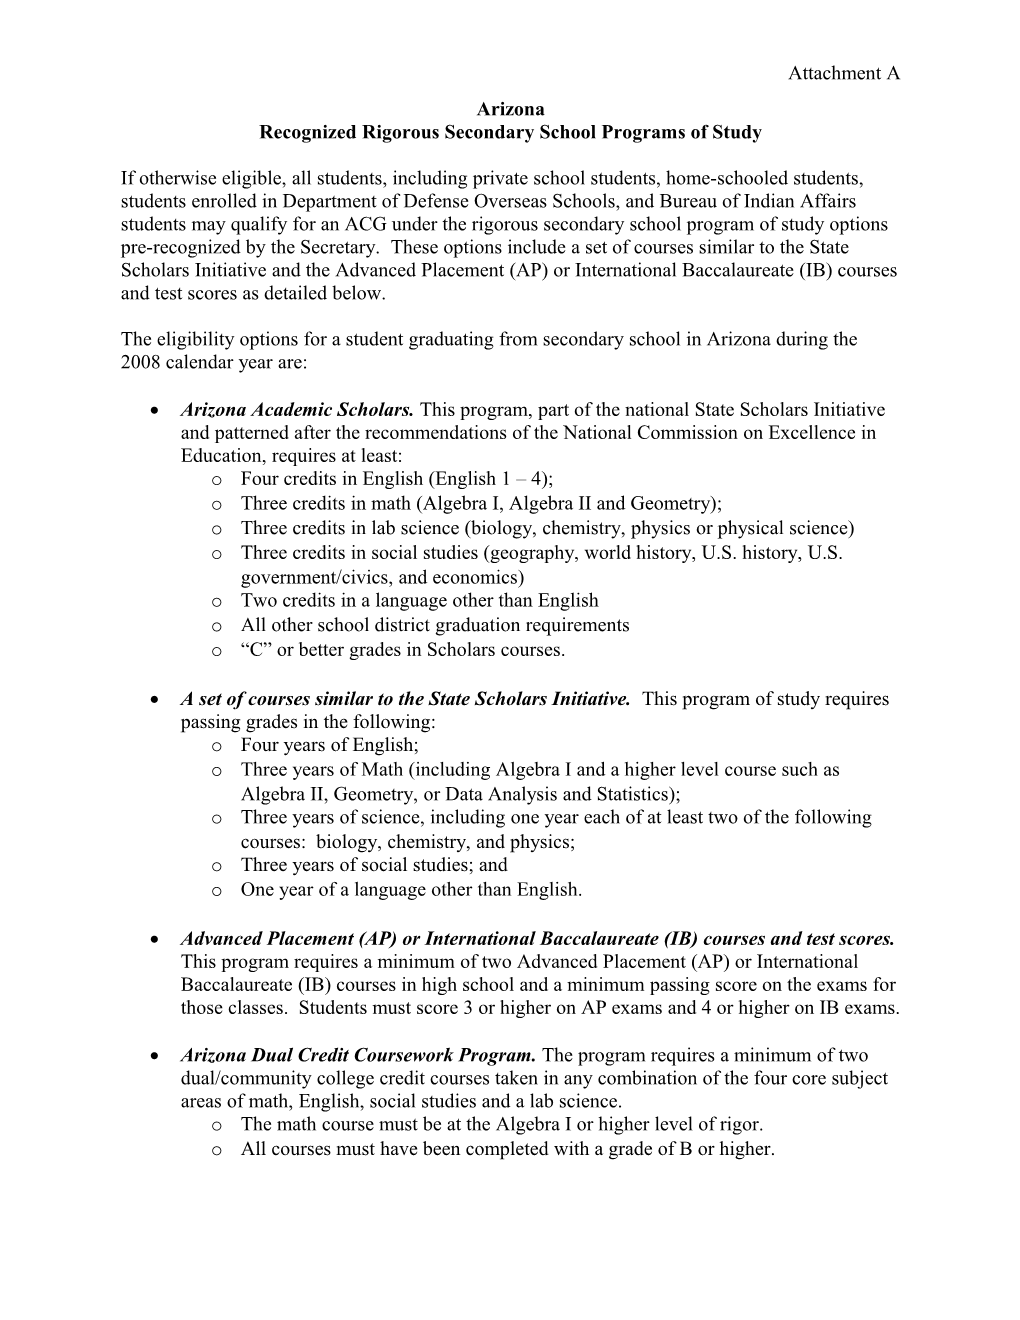 Academic Competitiveness Grants - Attachment to Arizona Letter - 2008 (MS Word)